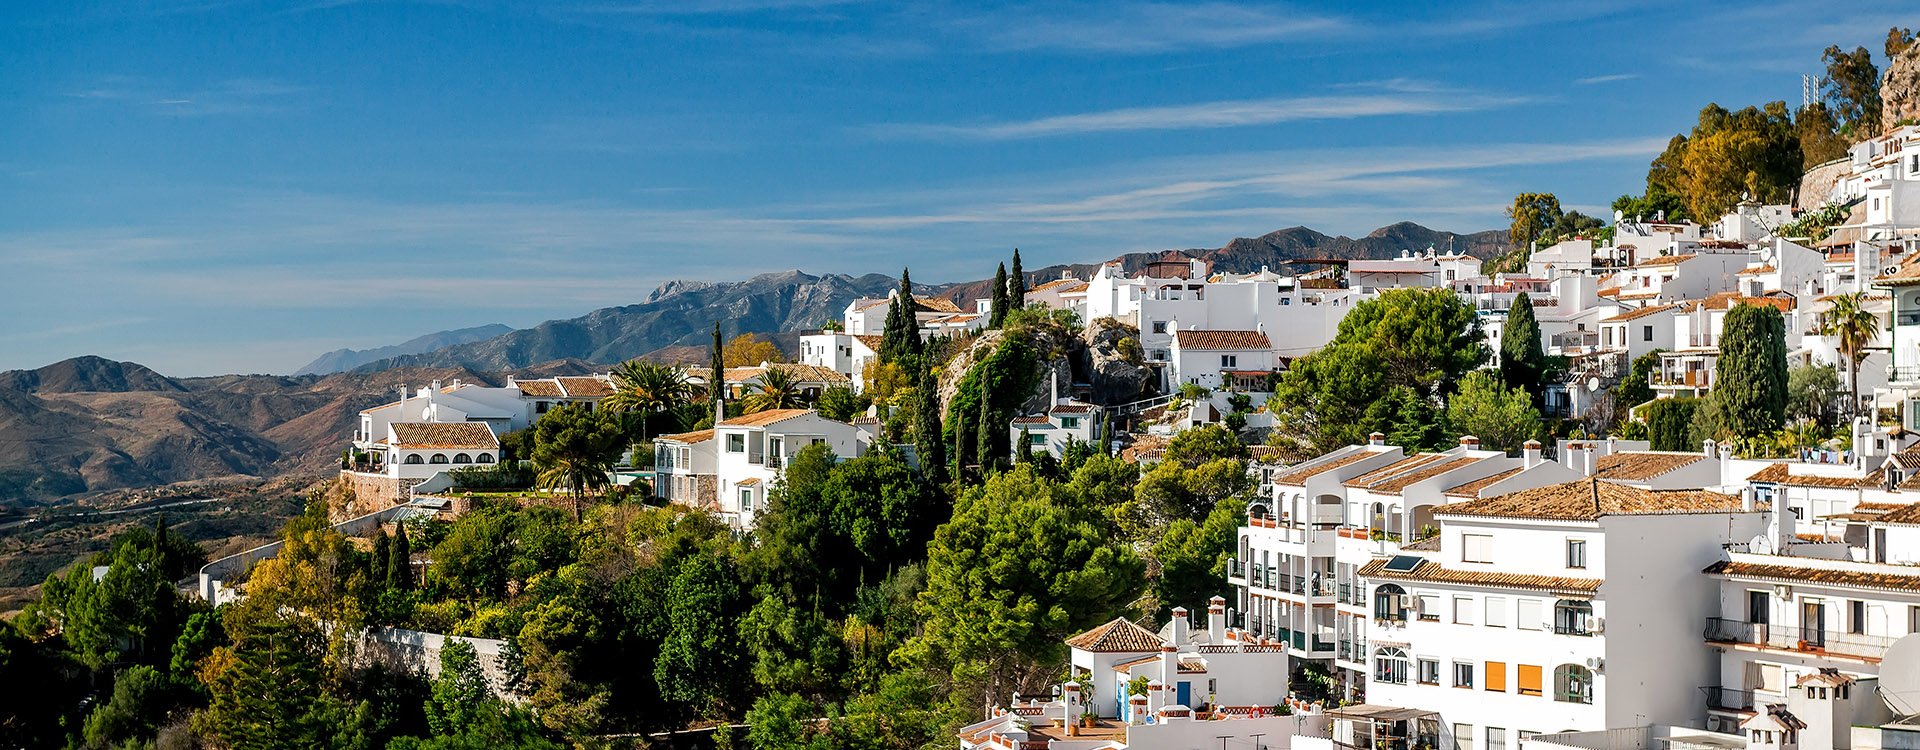 Charming little white village of Mijas. Costa del Sol, Andalusia. Spain